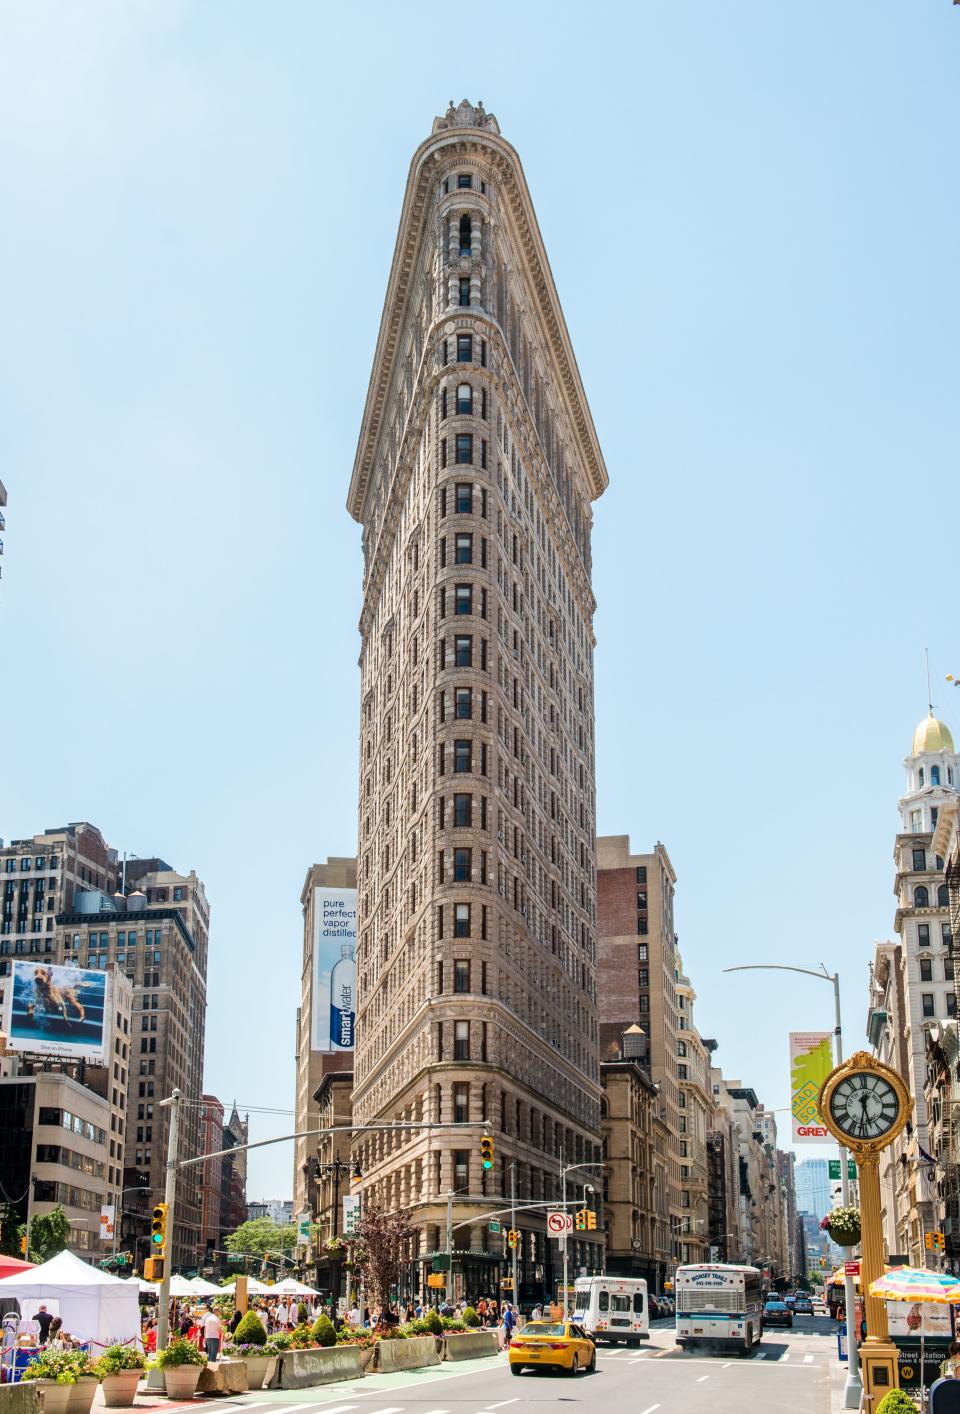 NEW YORK, NY - JULY 16:  A view of the Flatiron Building and the Flatiron Plaza on July 16, 2017 in New York City.  (Photo by Noam Galai/Getty Images)